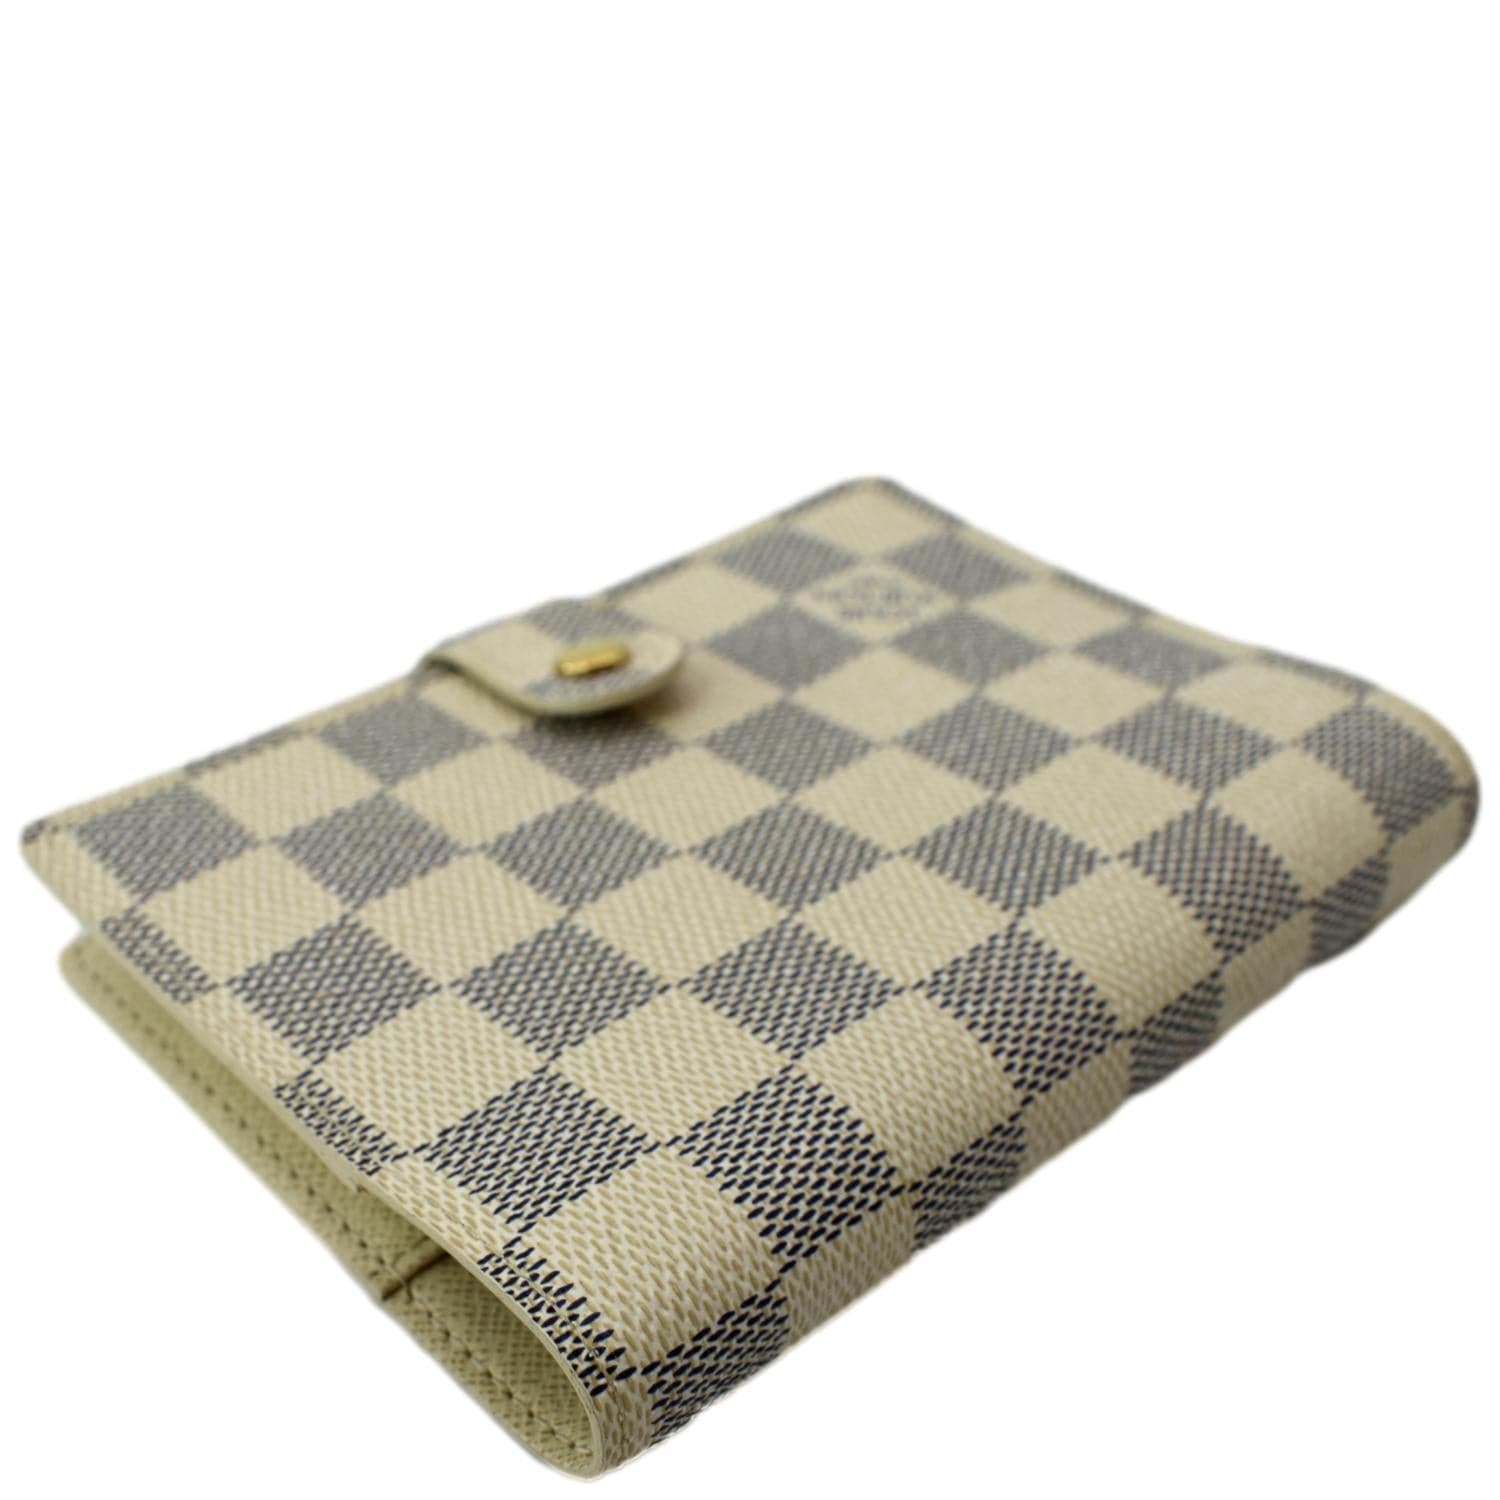 Pack a $525 order with me! 🥰 Louis Vuitton Agenda in Damier